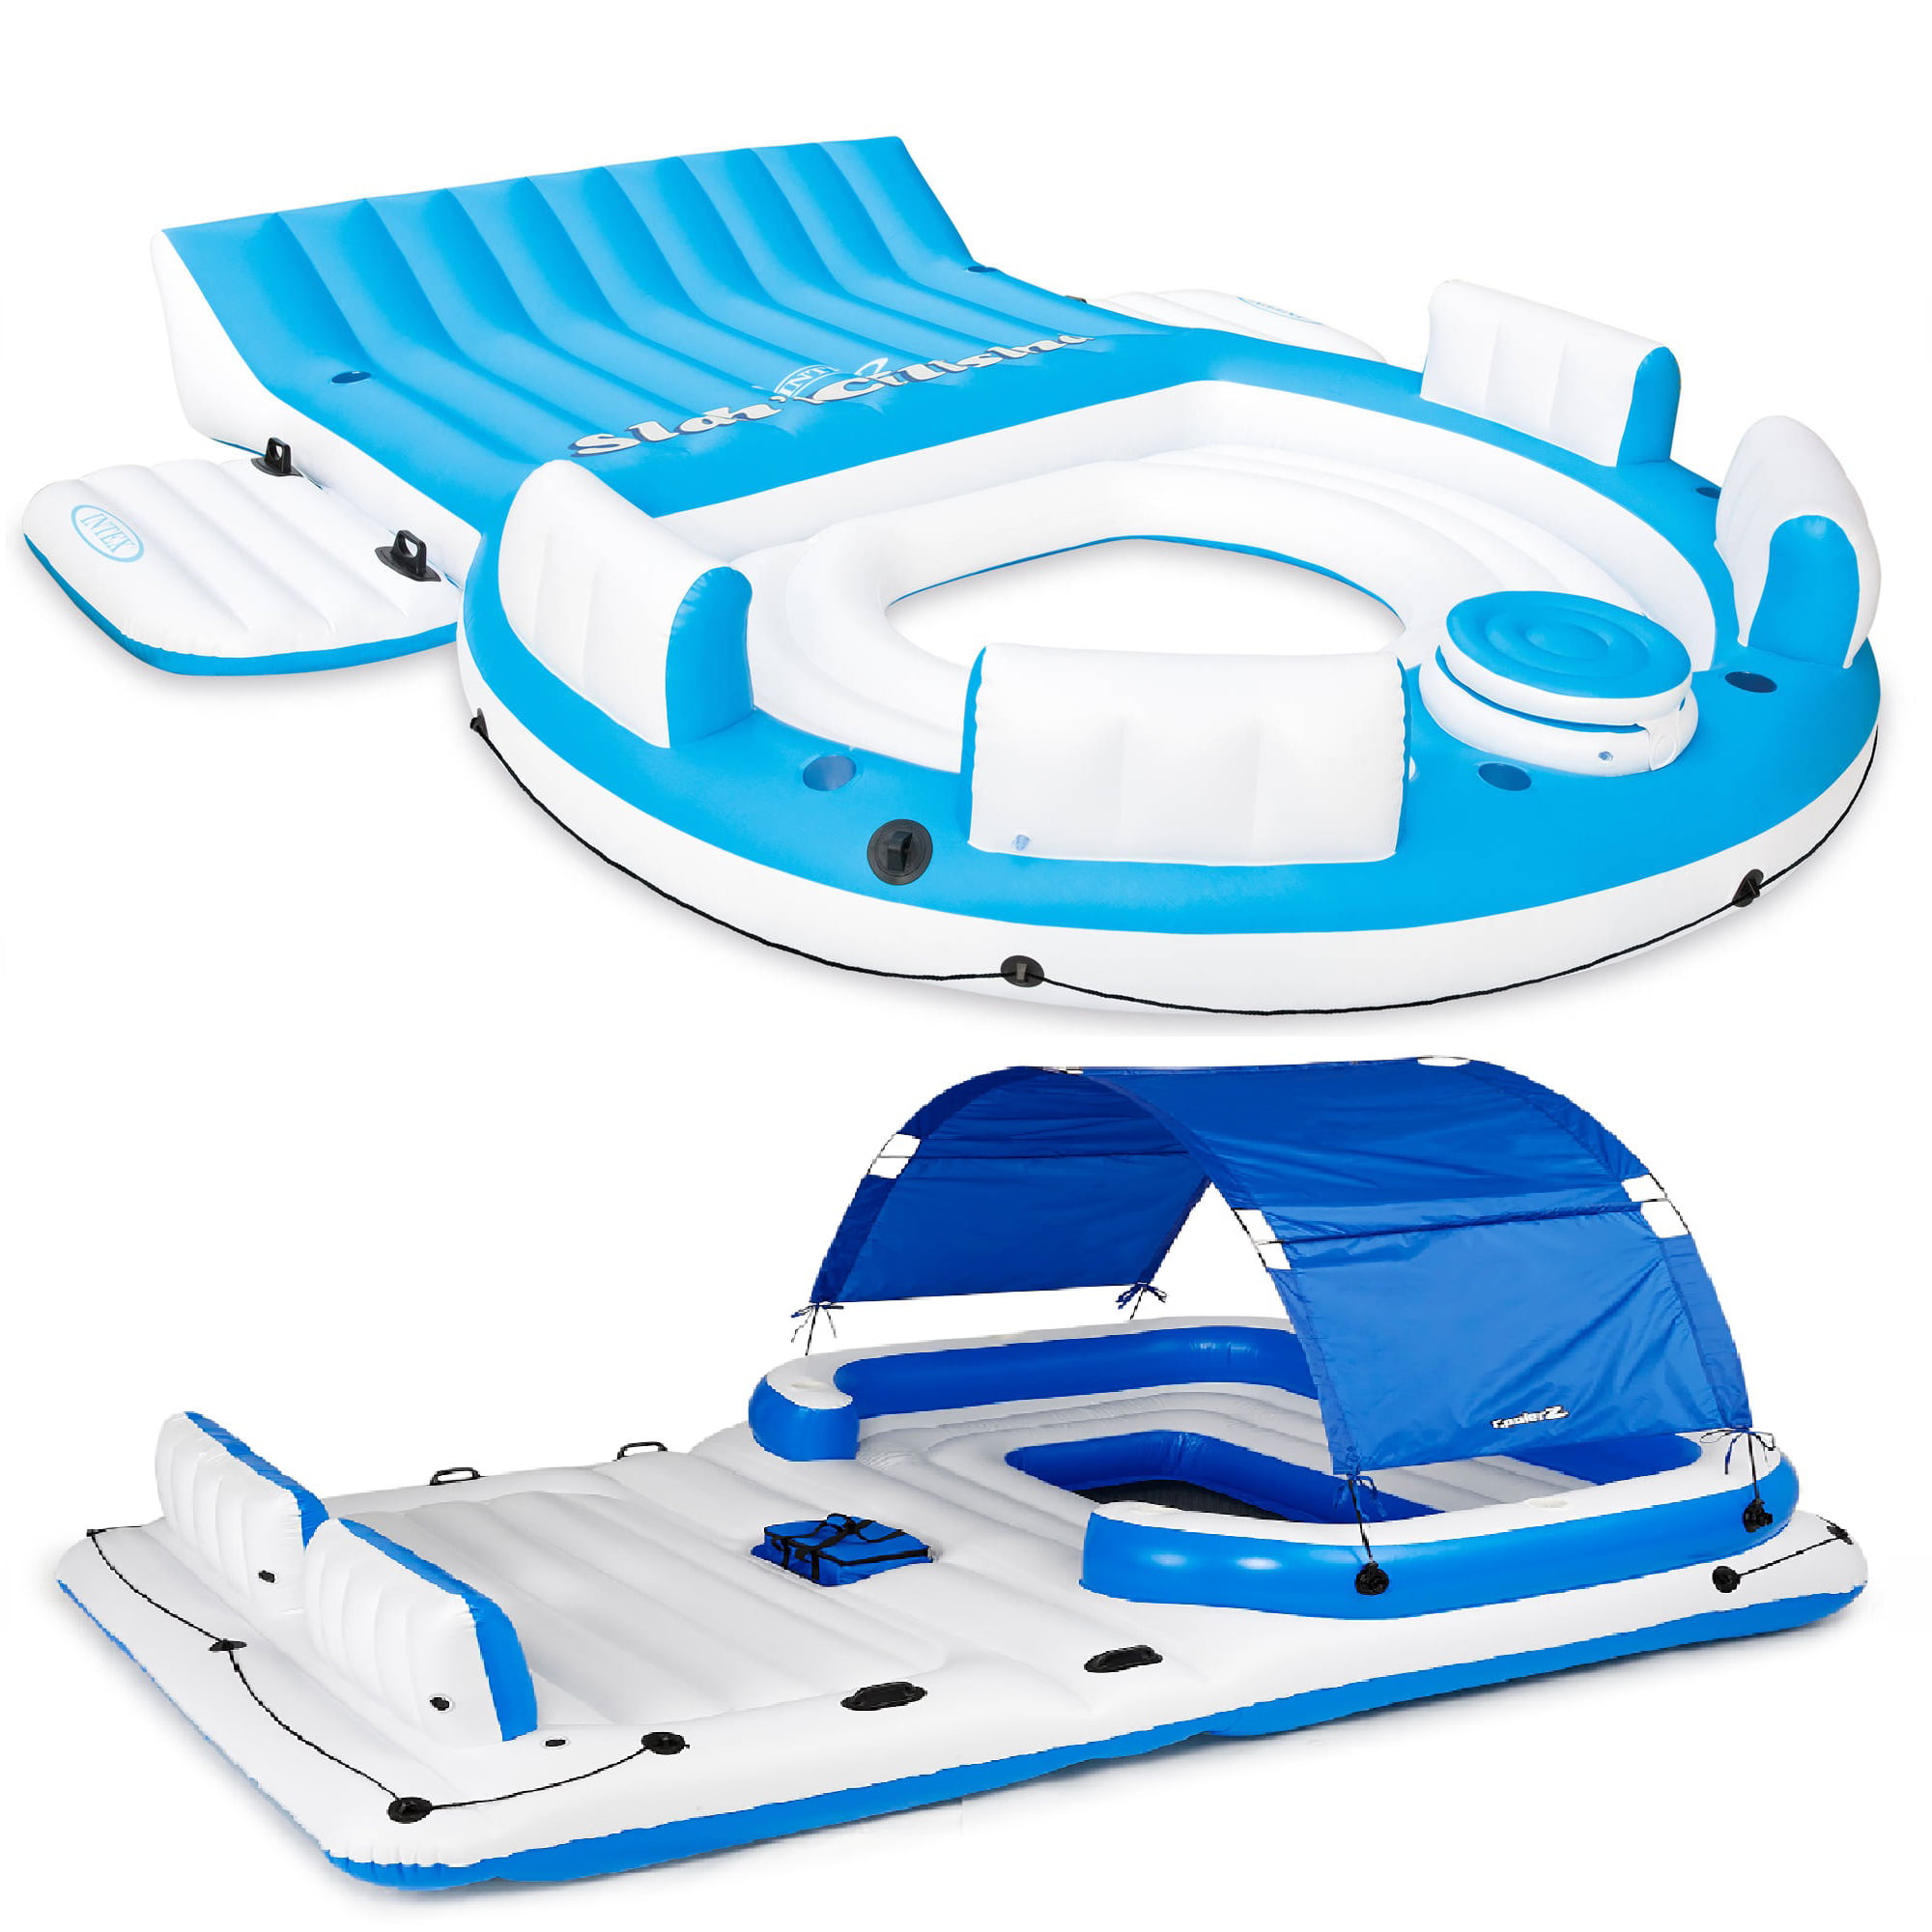 6 Person Inflatable Floating Island Pool Lake Party Canopy Raft Lounge w Cooler 